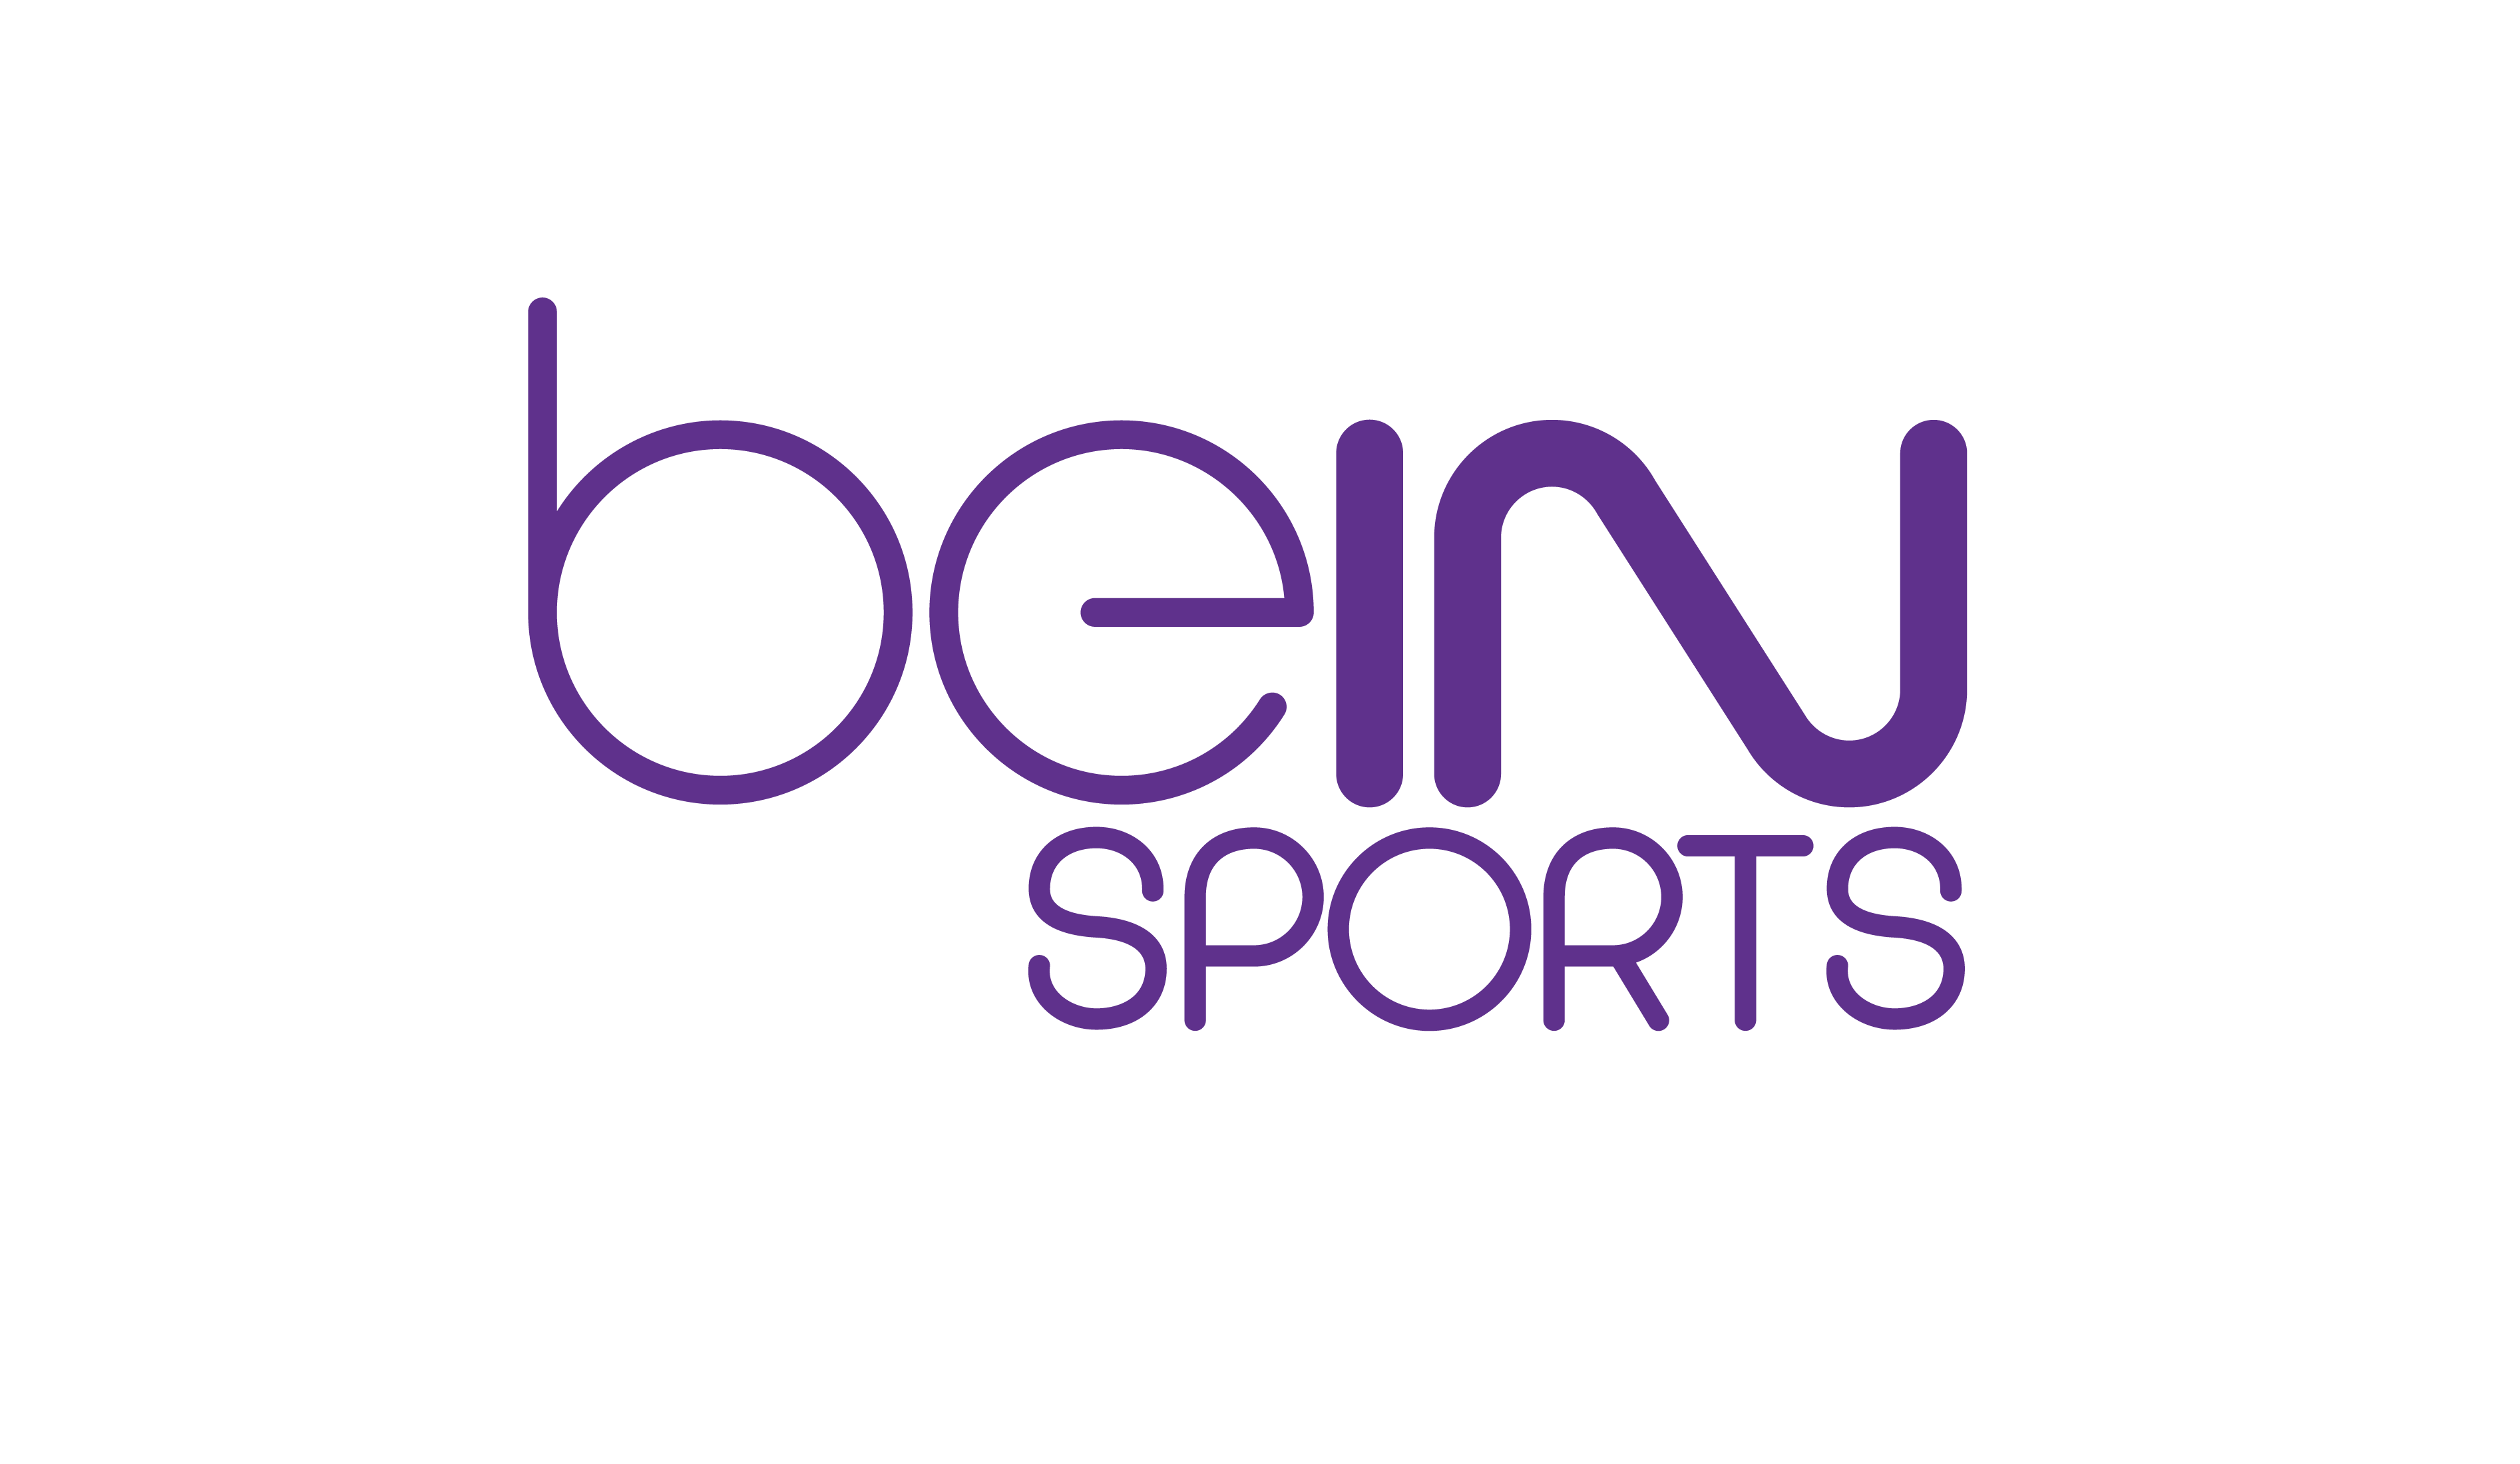 Bein Logo - File:Bein sport logo.png - Wikimedia Commons